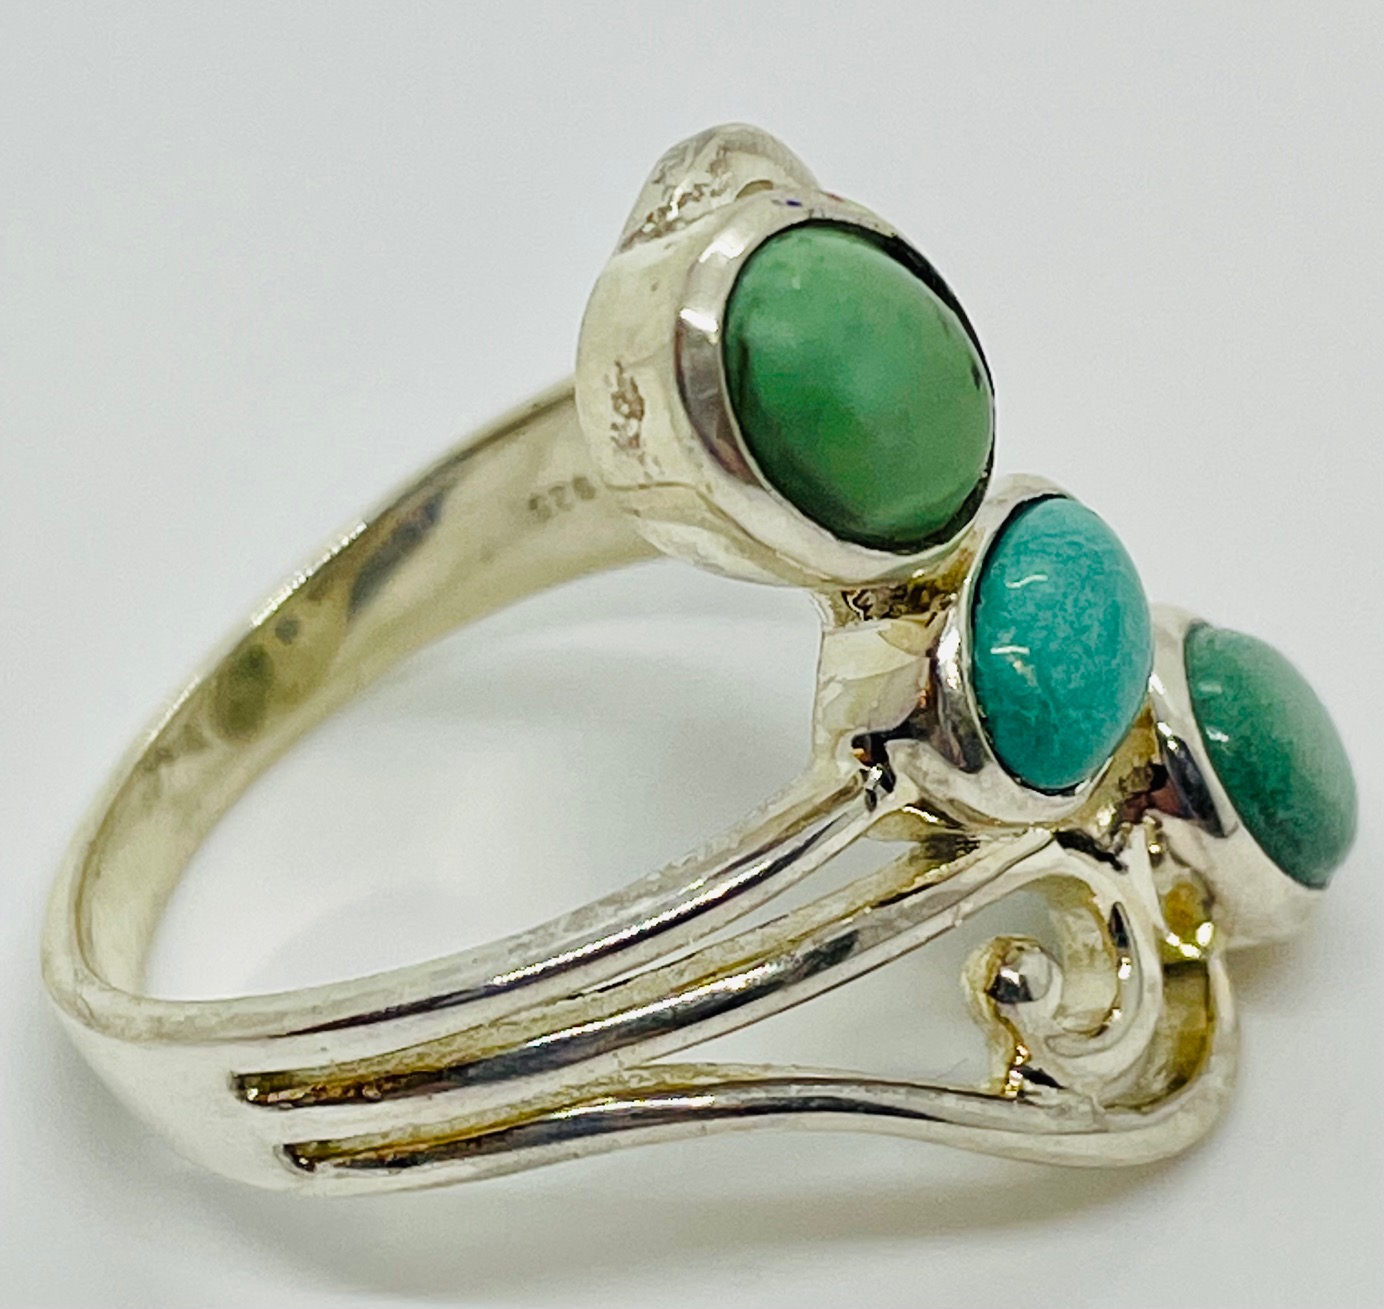 Turquoise Ring 6.52 grams Size 9